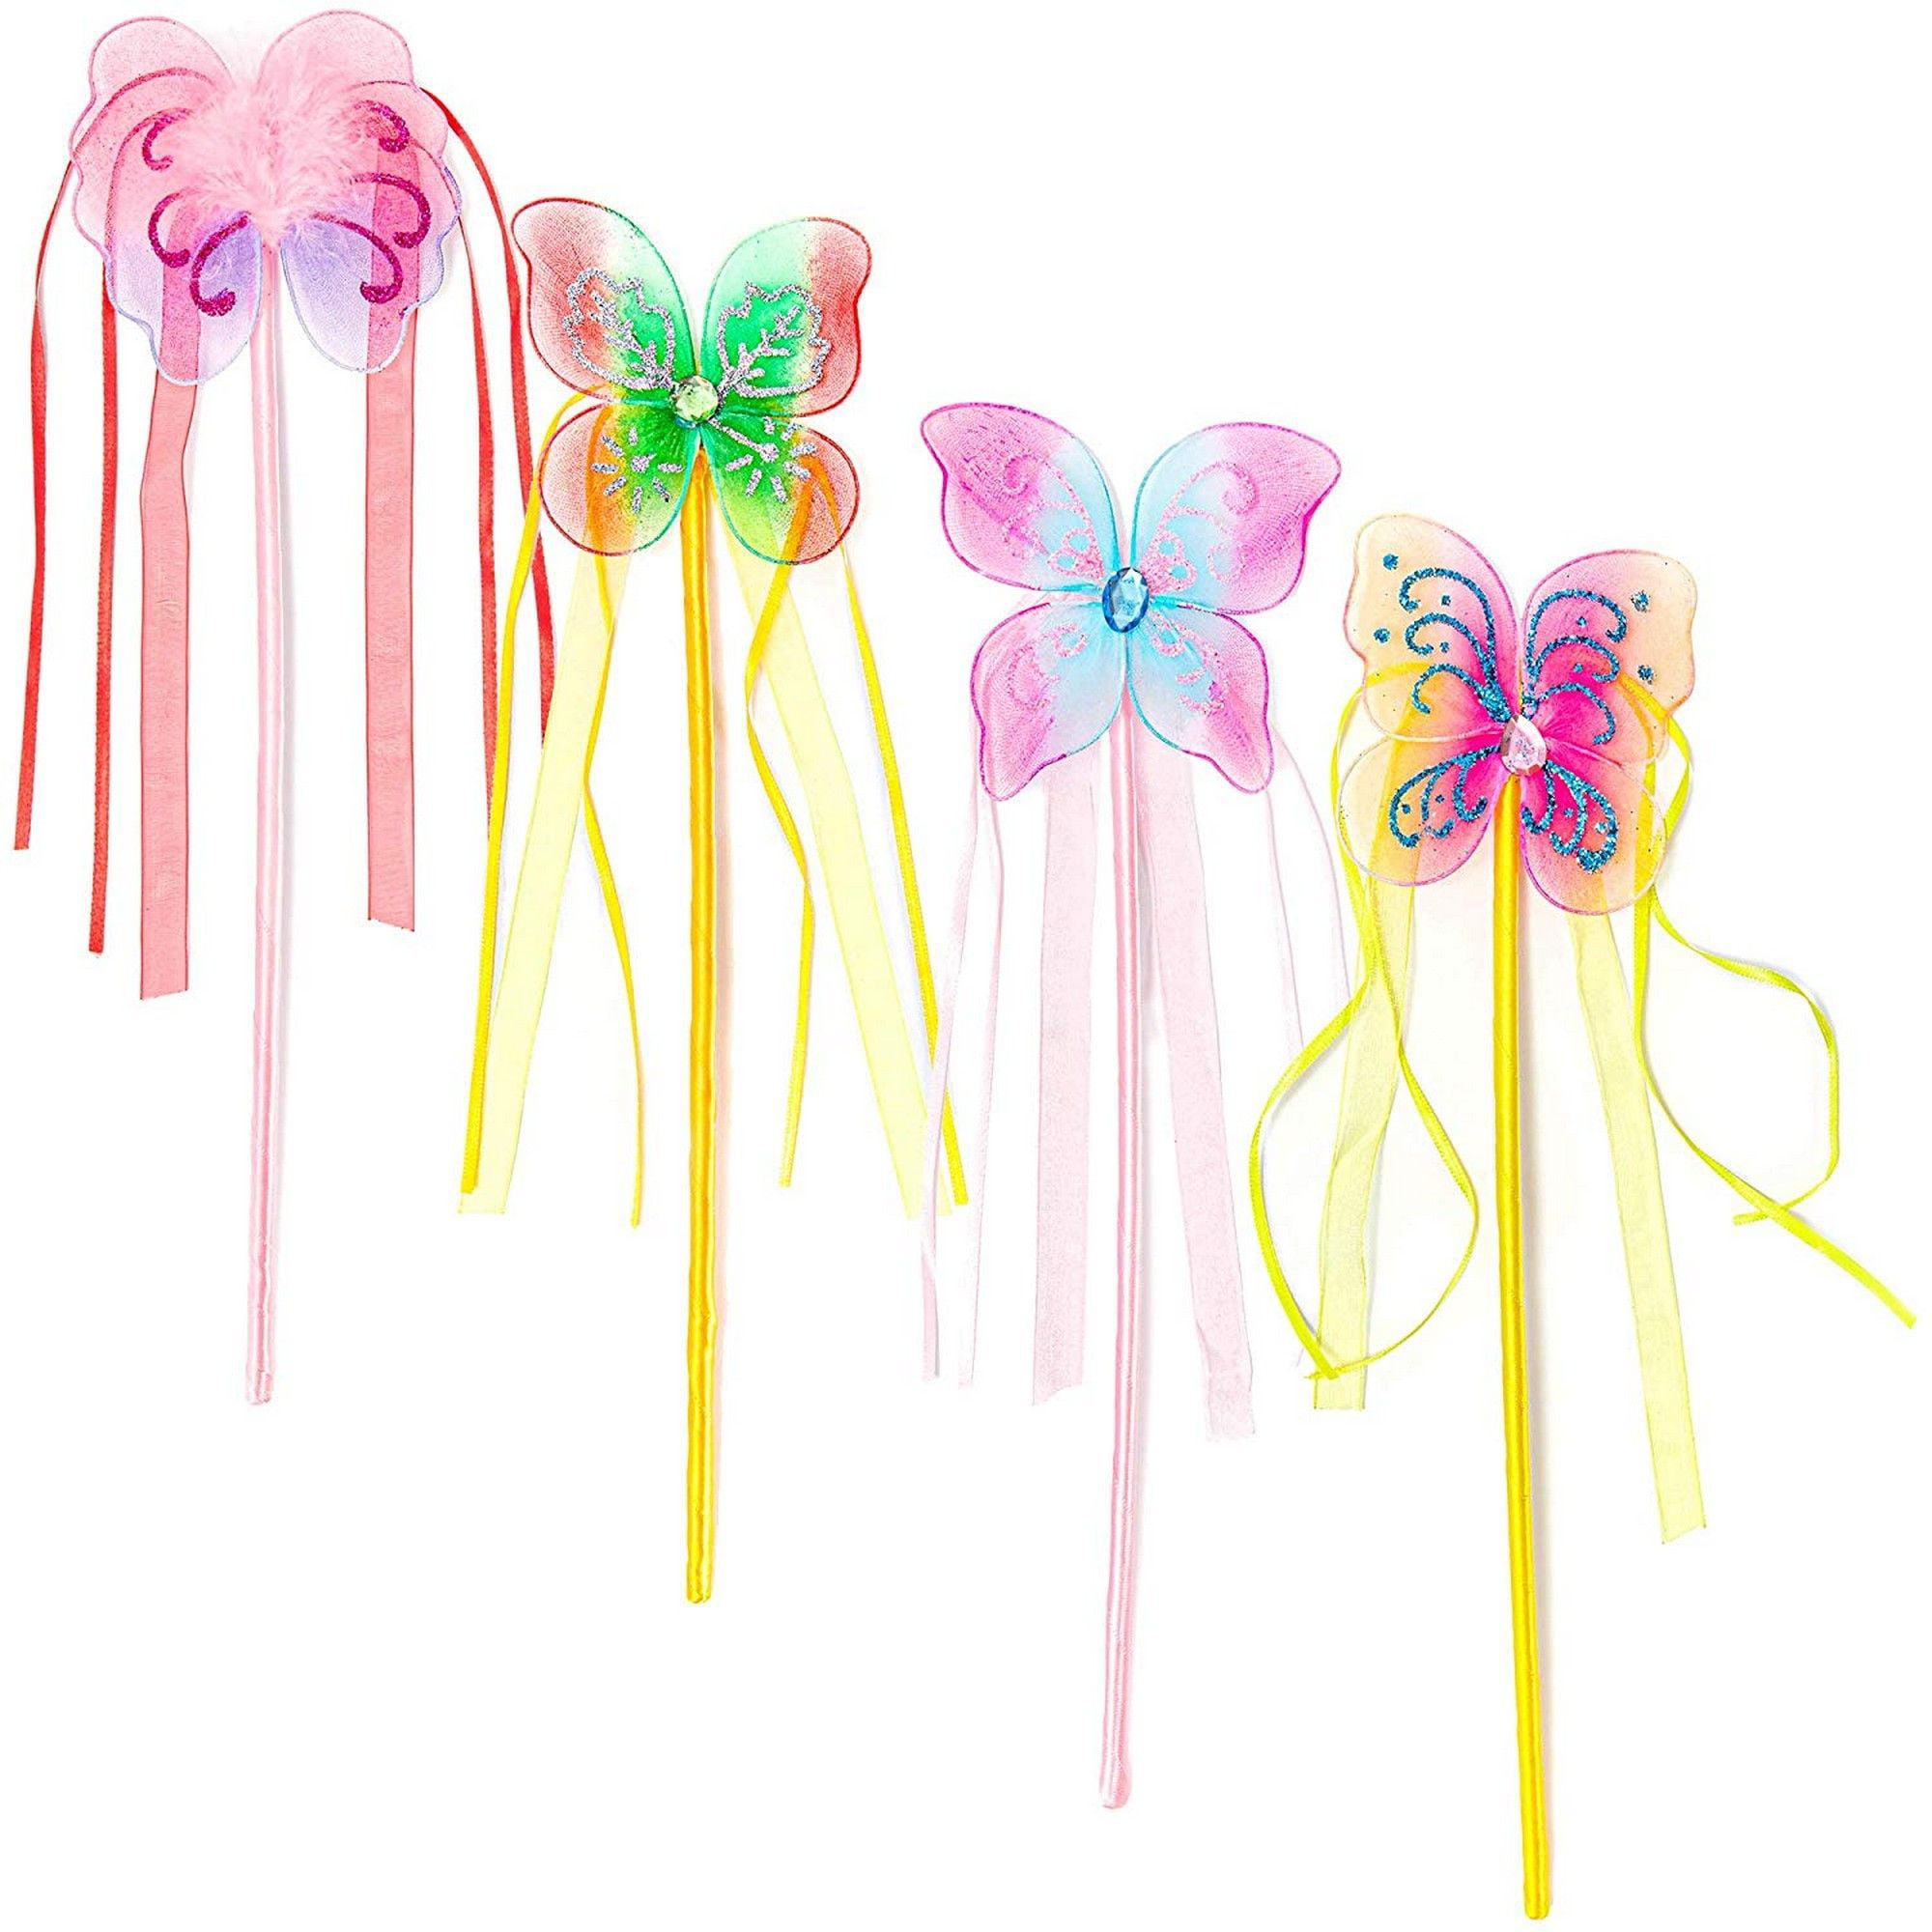 Blue Panda Princess Fairy Butterfly Wands, Ballerina Birthday Party Favors (12 Pack)